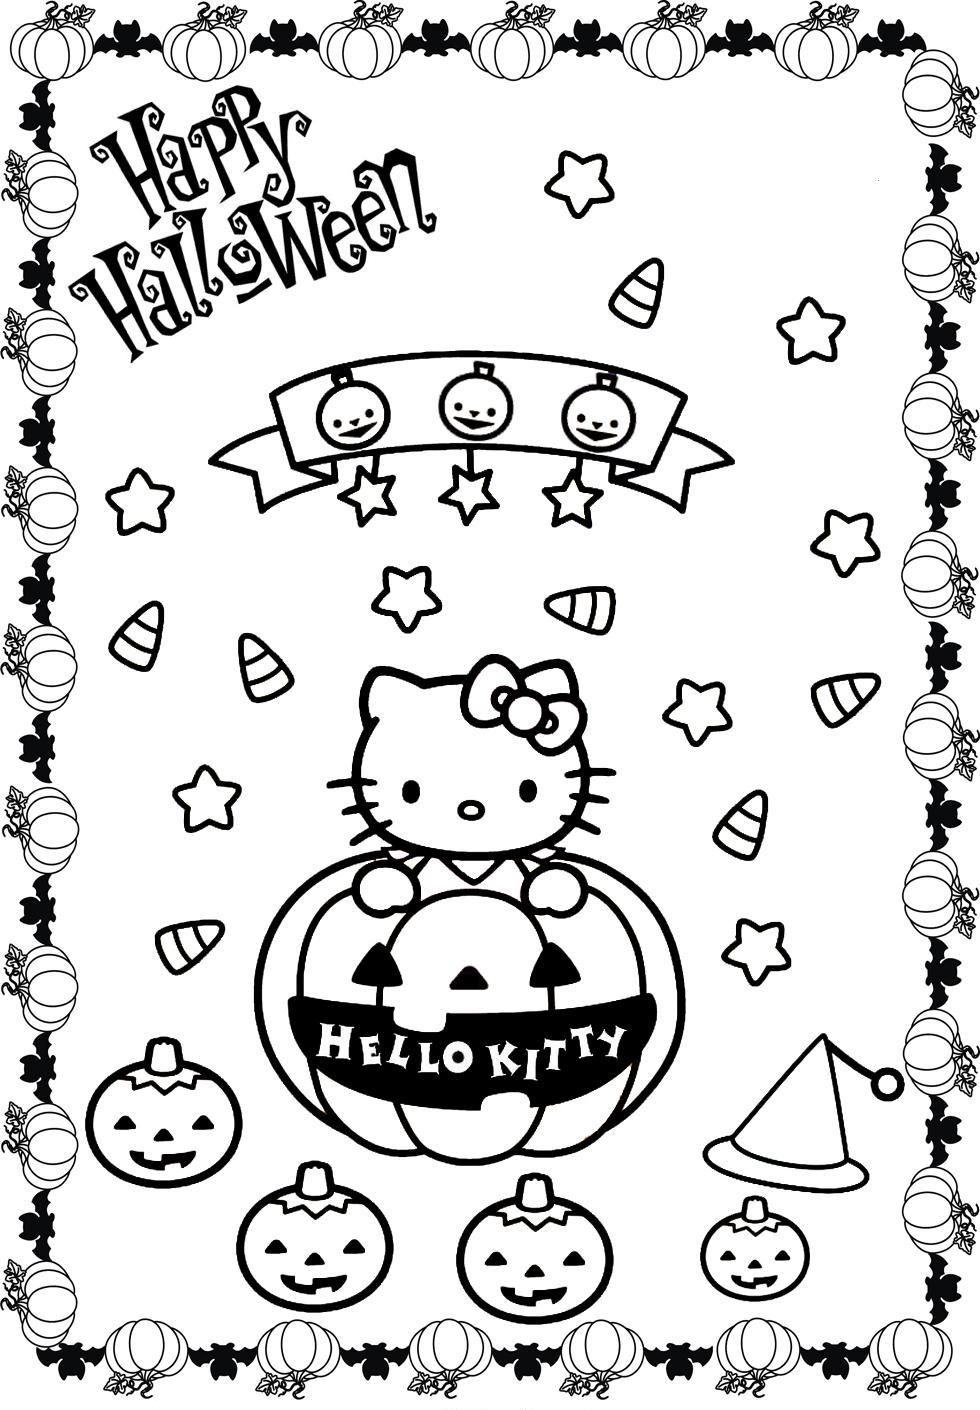 Hello Kitty Halloween Coloring Pages To Print at ...